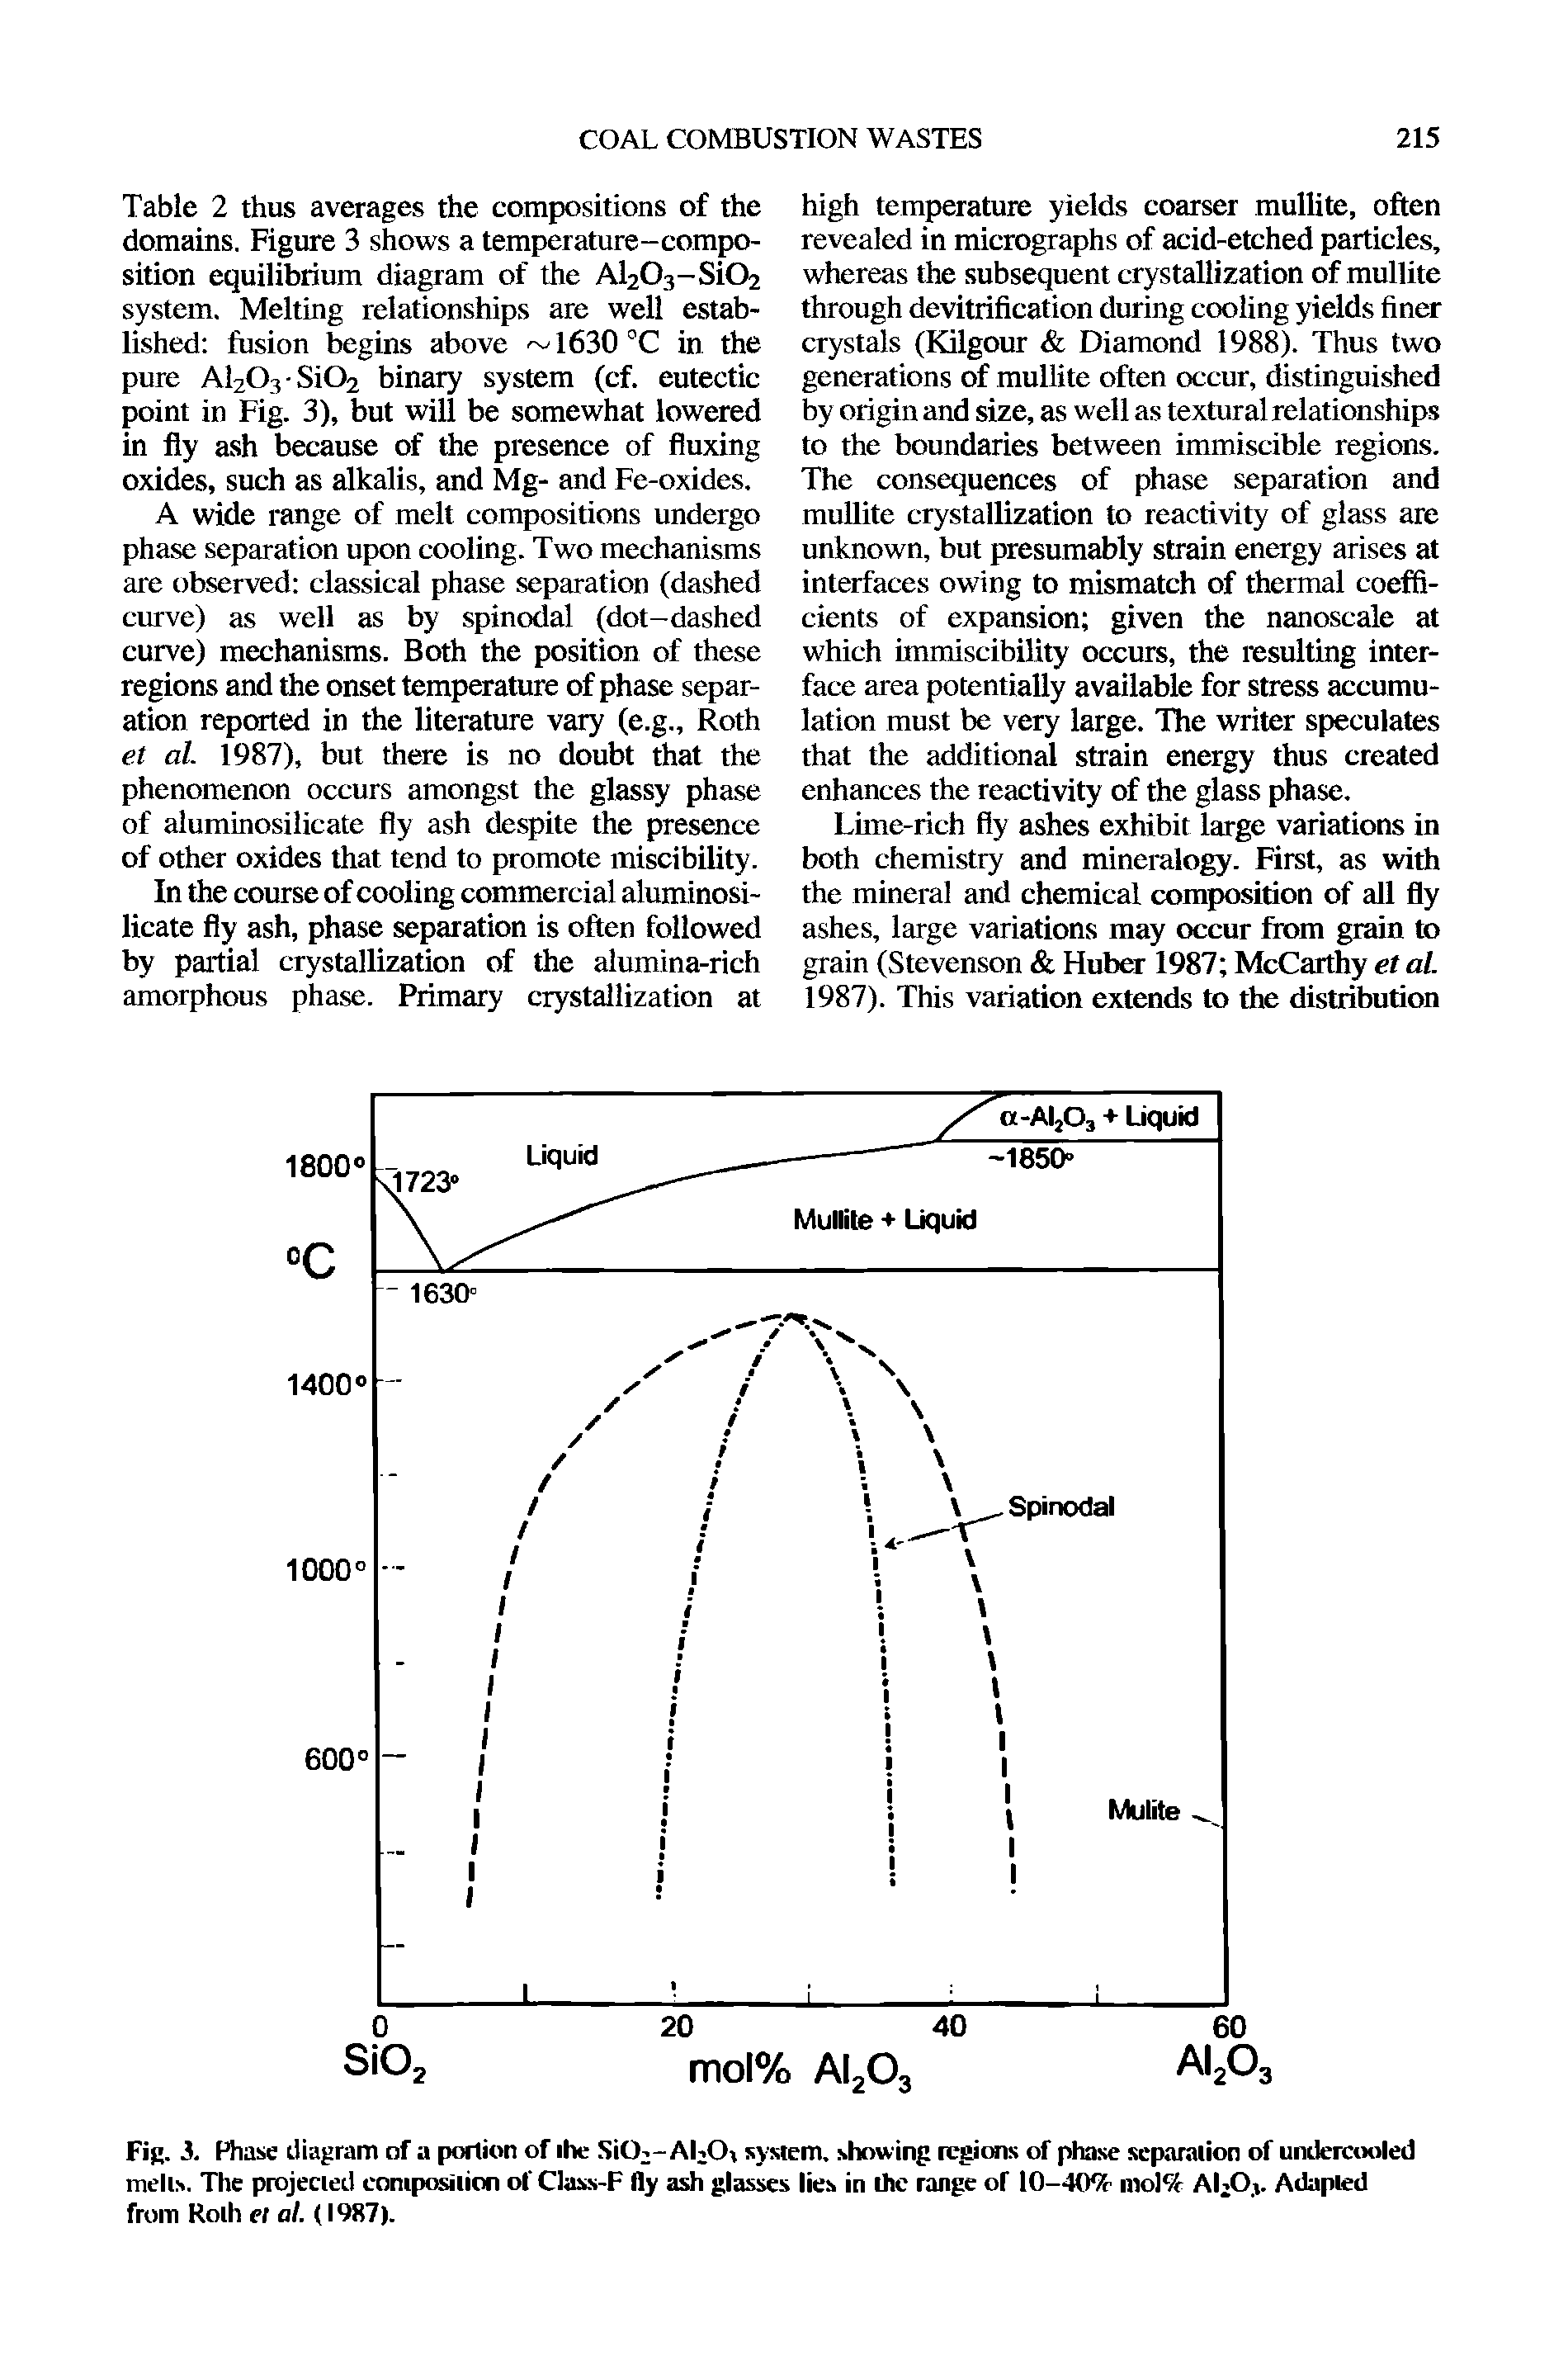 Fig. 3. Phase diagram of a portion of ihe Sitb-AbO% system, showing regions of phase separation of undercooled melts. The projected composition of Class-F fly ash glasses lies in the range of 10-4051 mol /t AI,Ot. Adapted from Roth et al. (1987).